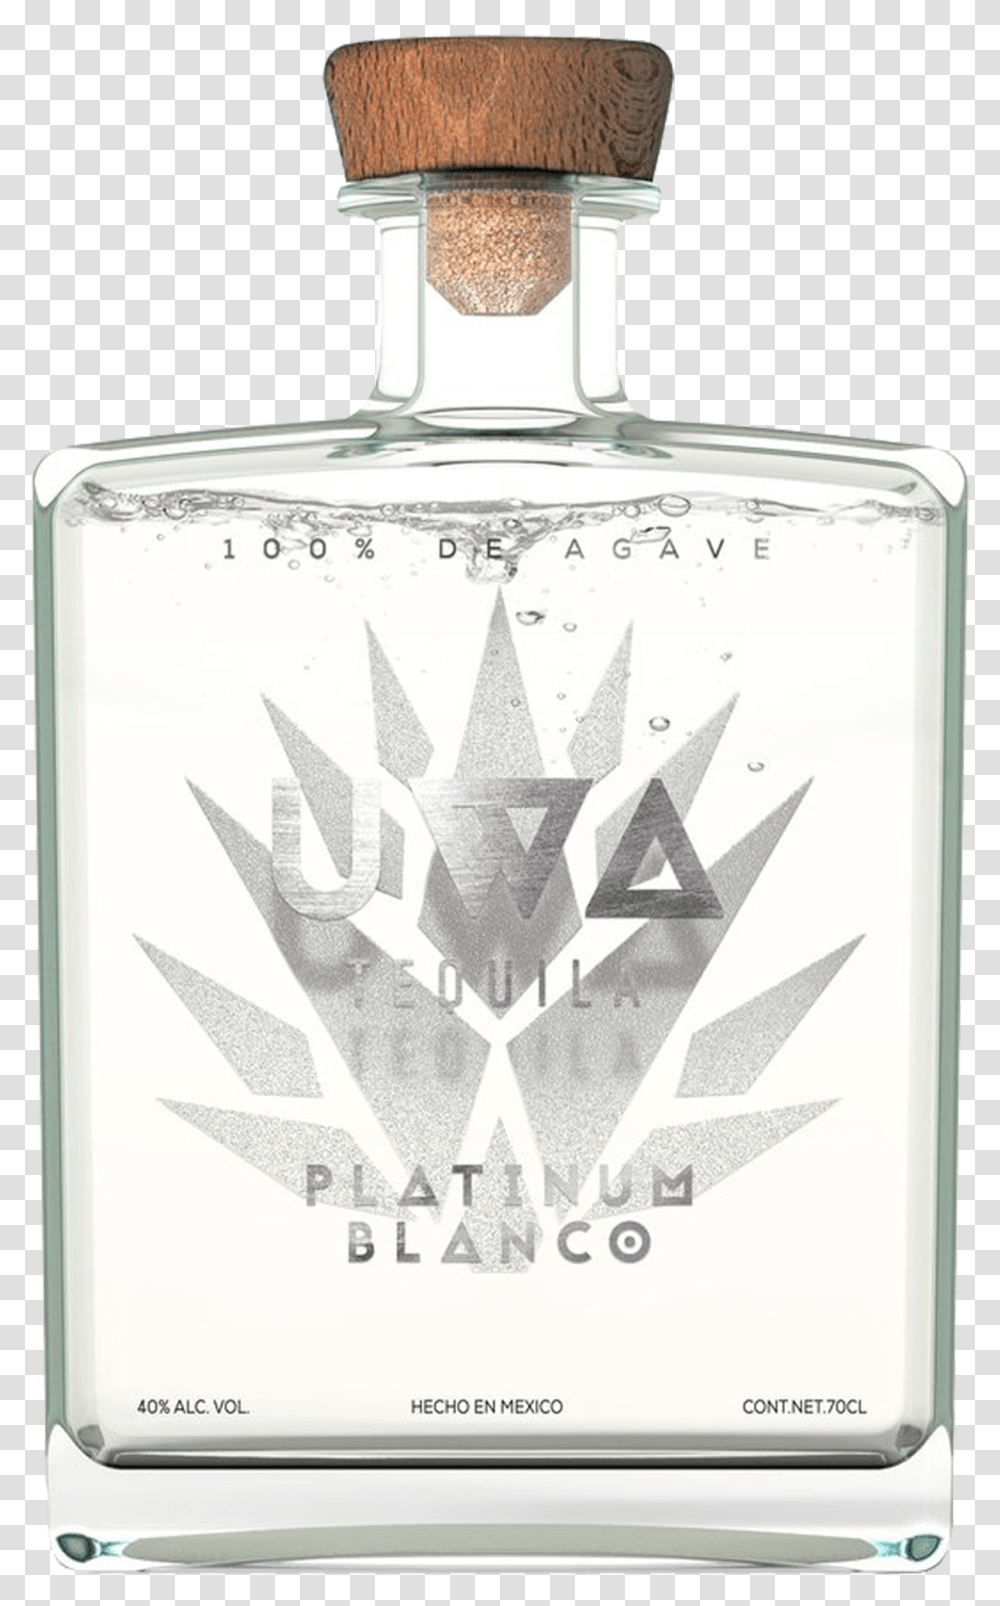 Class Lazyload Lazyload Fade In Cloudzoom Featured Uwa Tequila Platinum Blanco, Liquor, Alcohol, Beverage, Drink Transparent Png